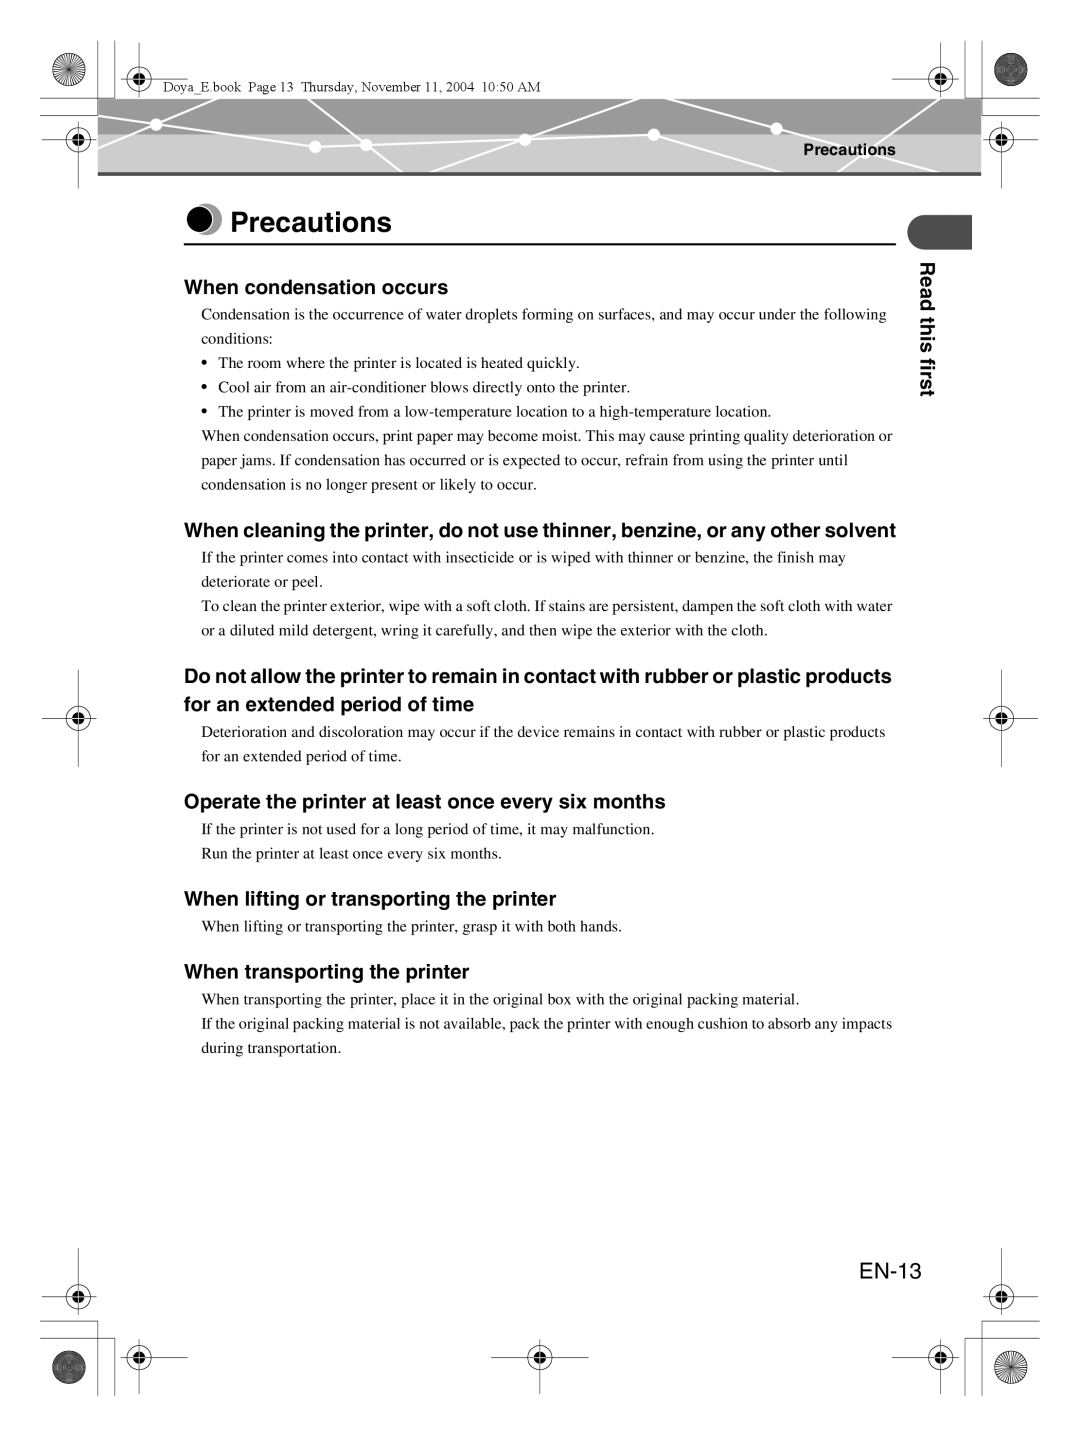 Olympus P-S100 user manual Precautions, EN-13, When condensation occurs, Operate the printer at least once every six months 